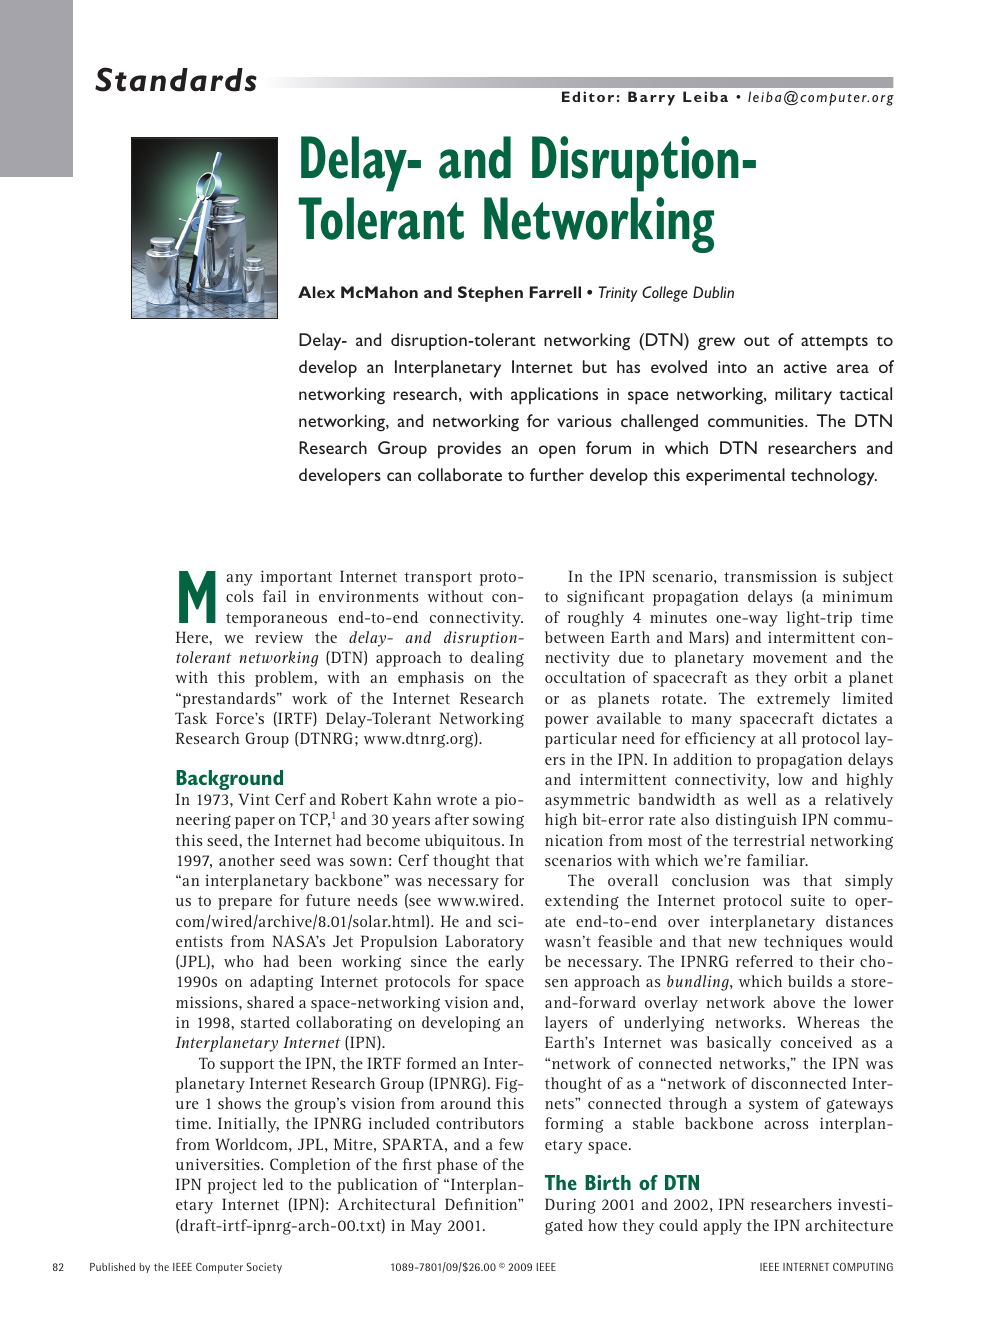 Delay And Disruption Tolerant Networking Topic Of Research Paper In Computer And Information Sciences Download Scholarly Article Pdf And Read For Free On Cyberleninka Open Science Hub